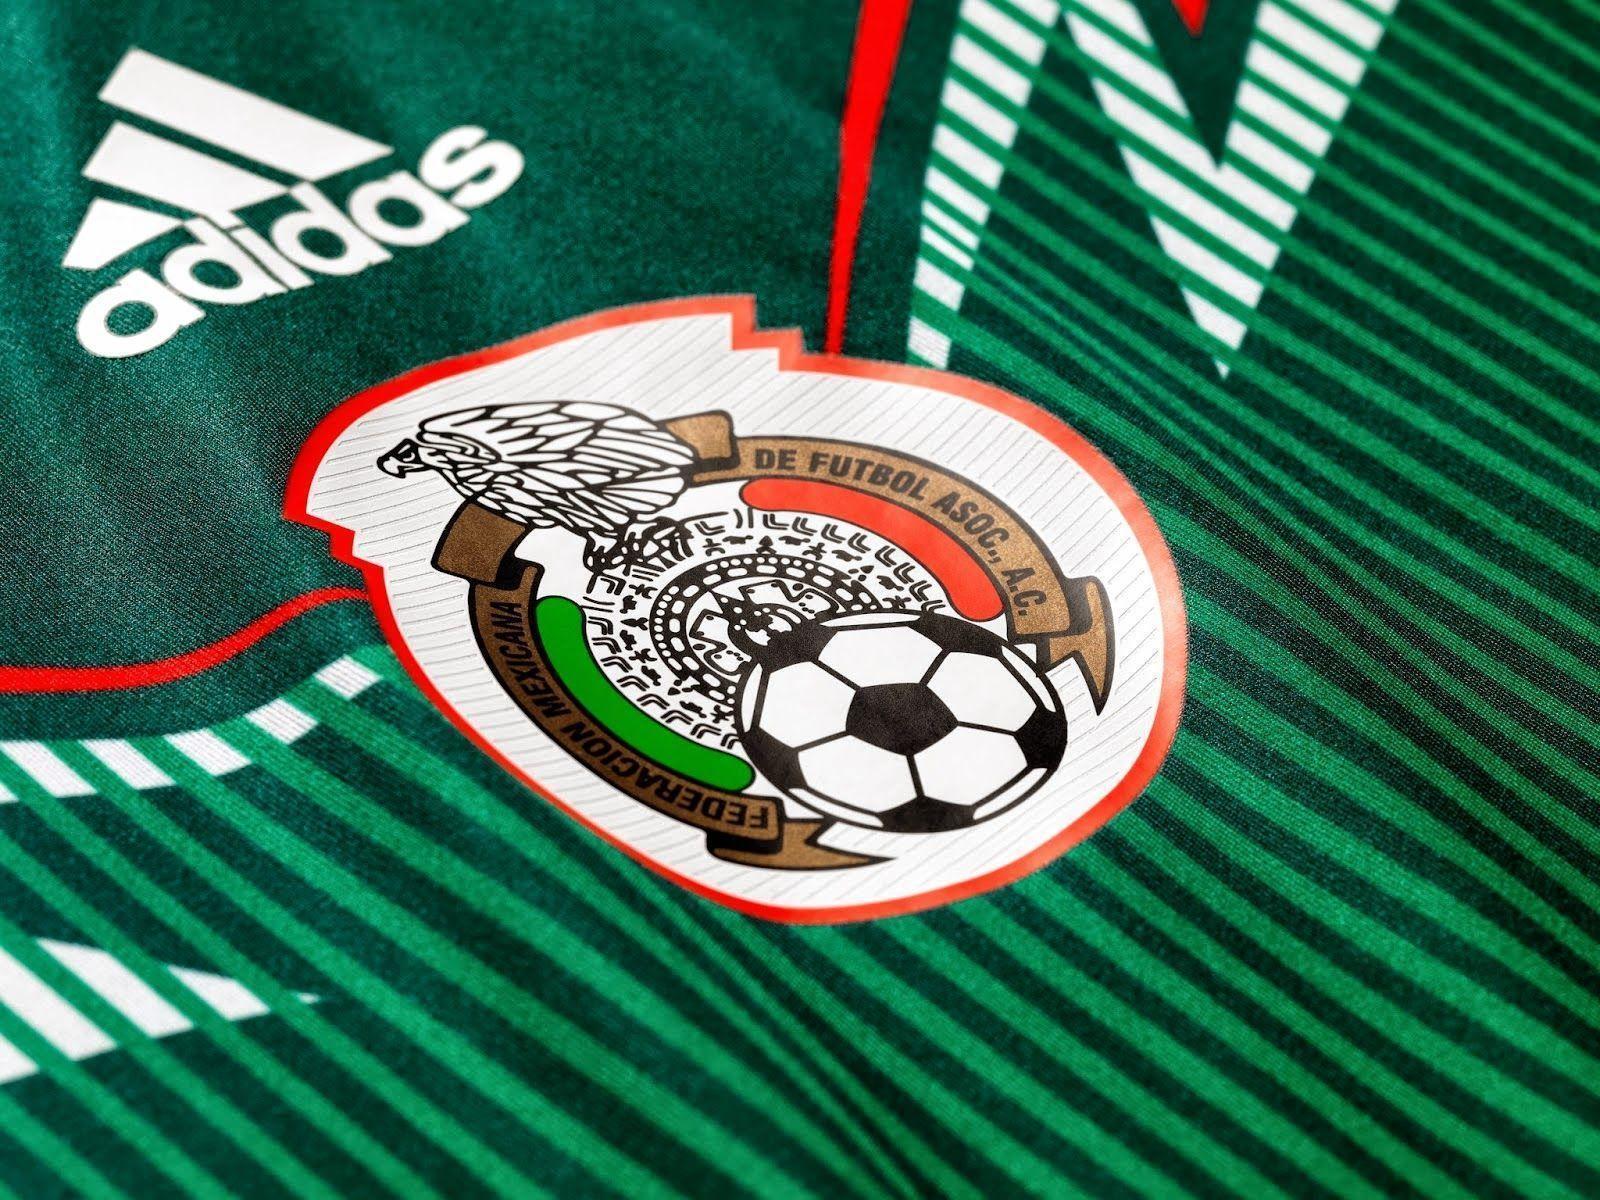 Mexico Soccer Team 2015 Wallpapers - Wallpaper Cave